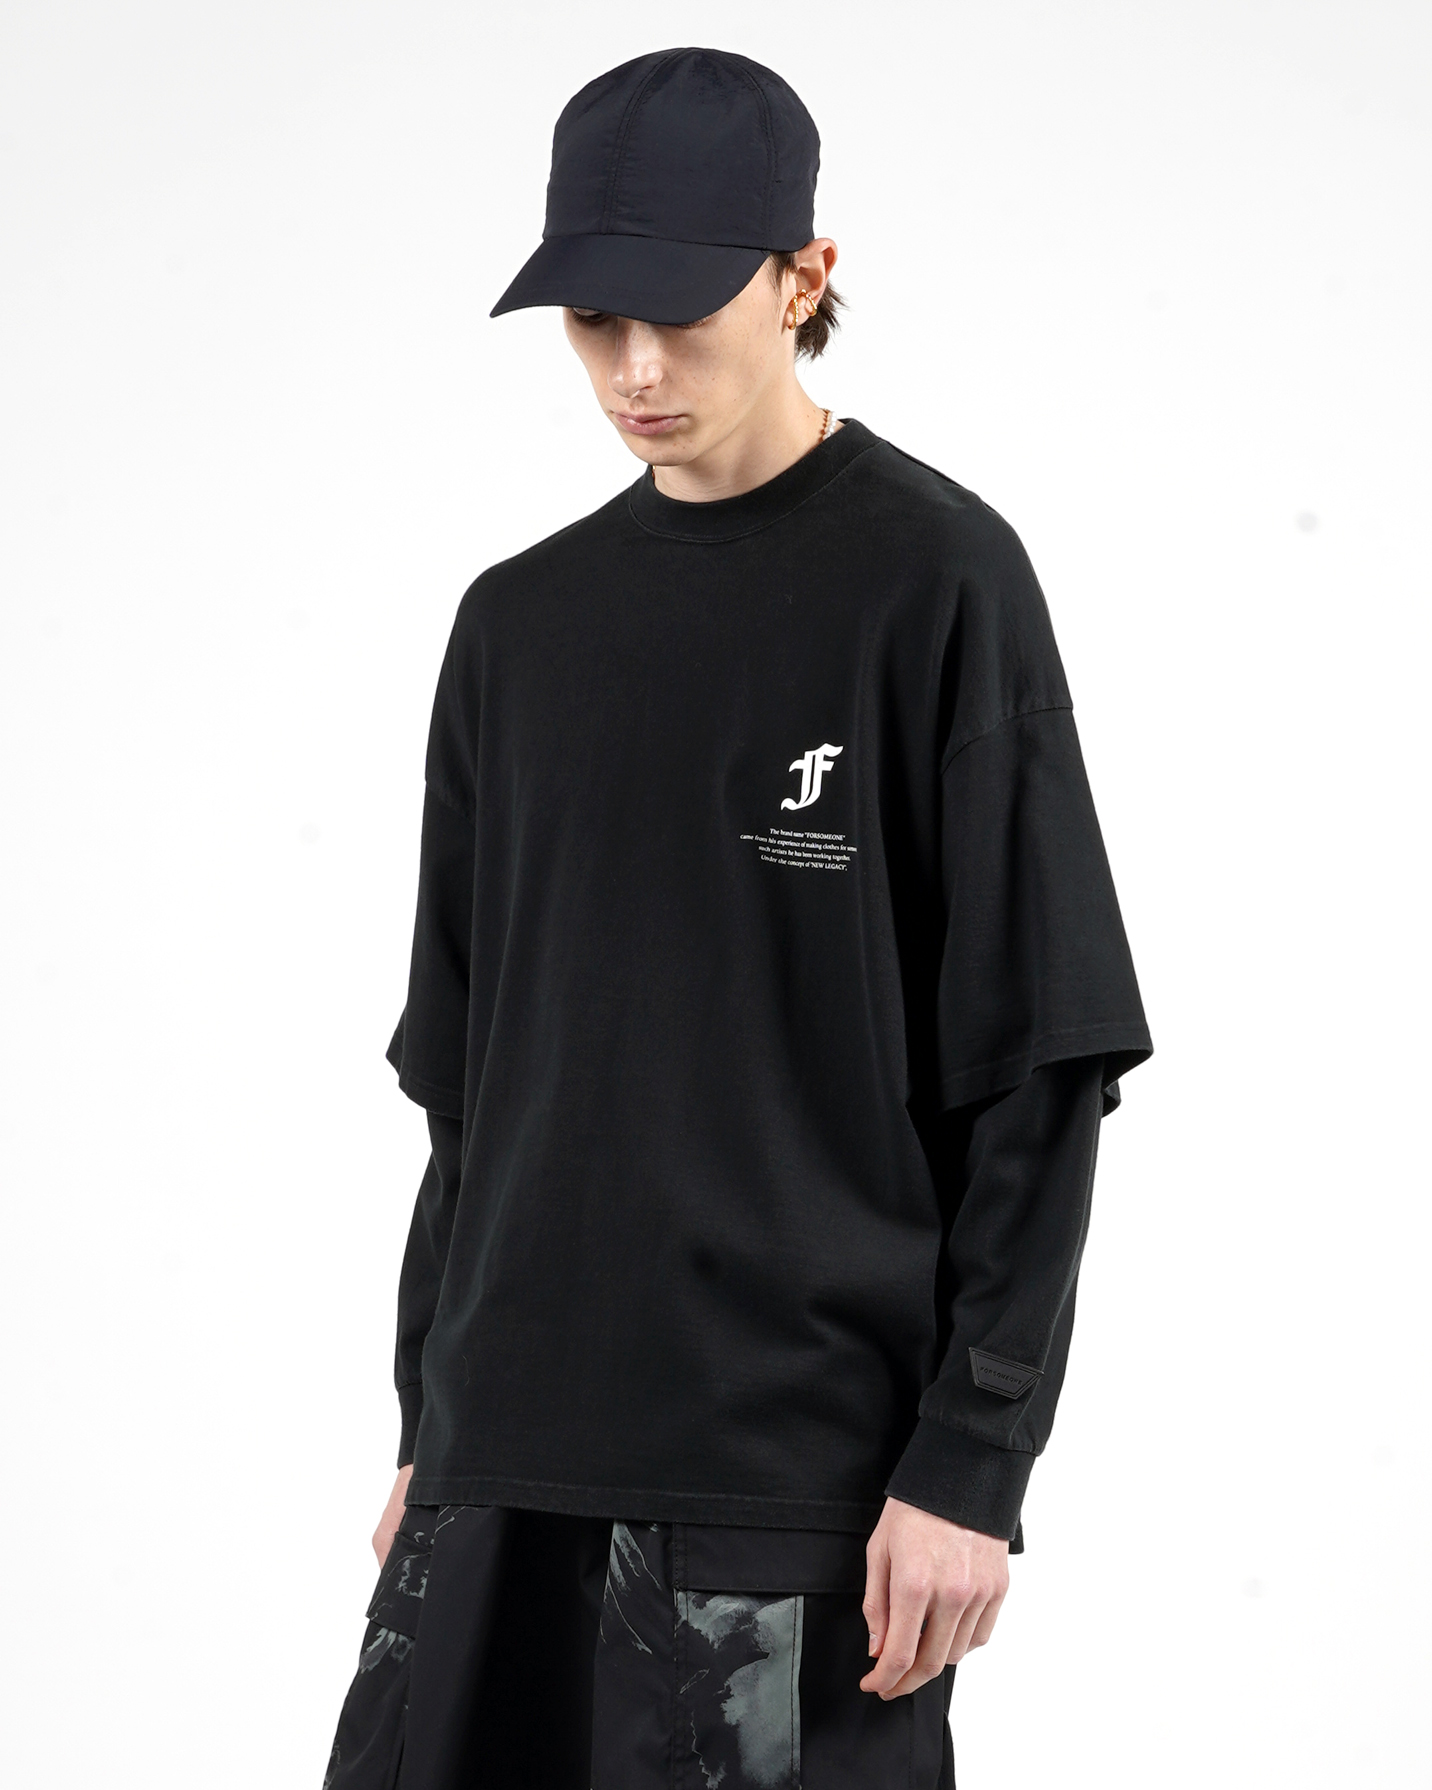 ALWAYS OUT OF STOCK EMBLEM L/S TEE-WHITE